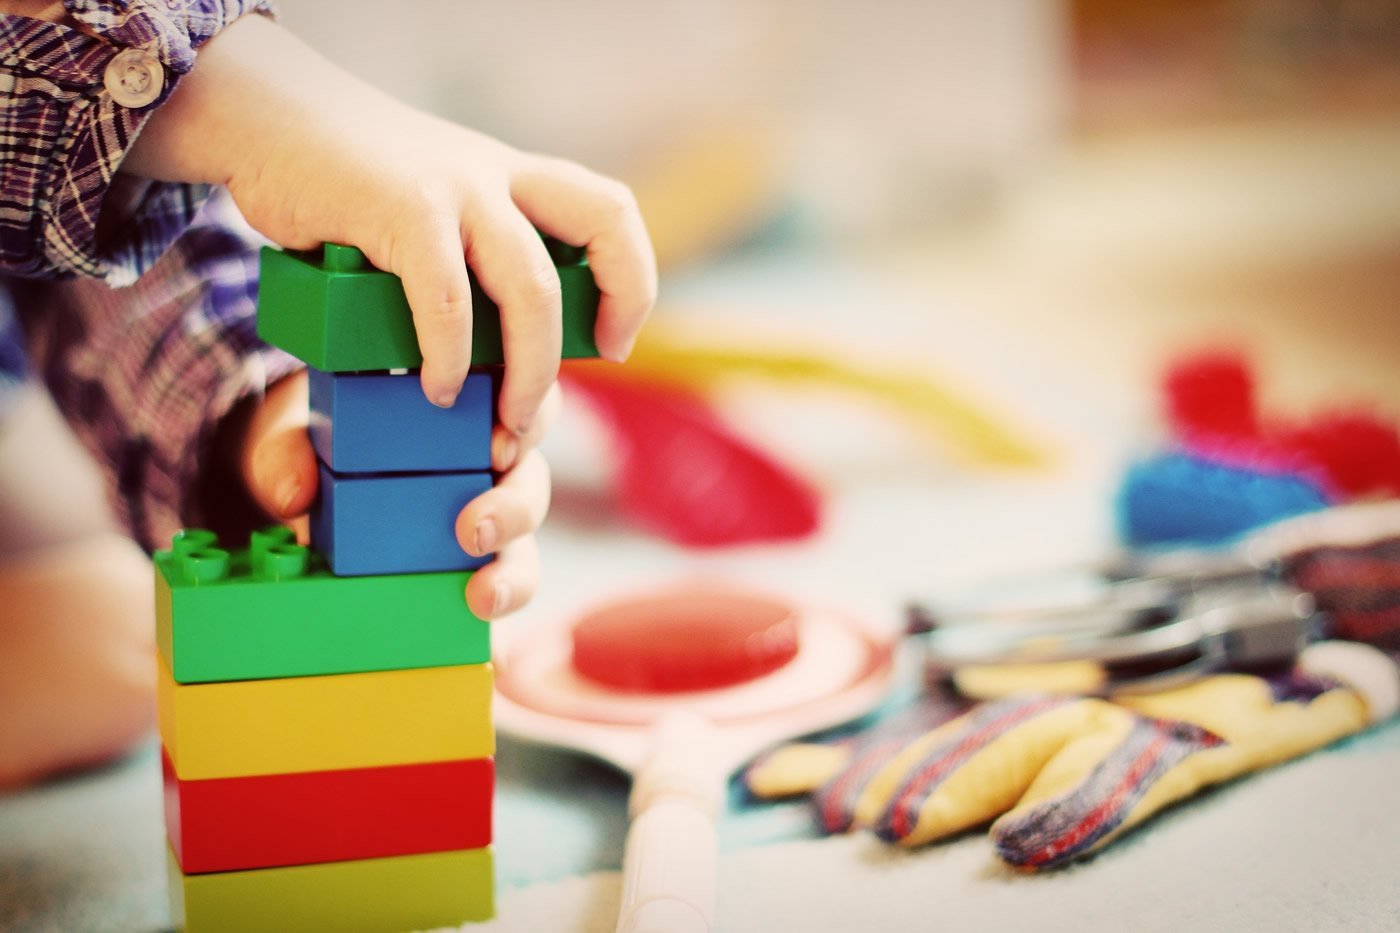 This shows a child playing with building blocks